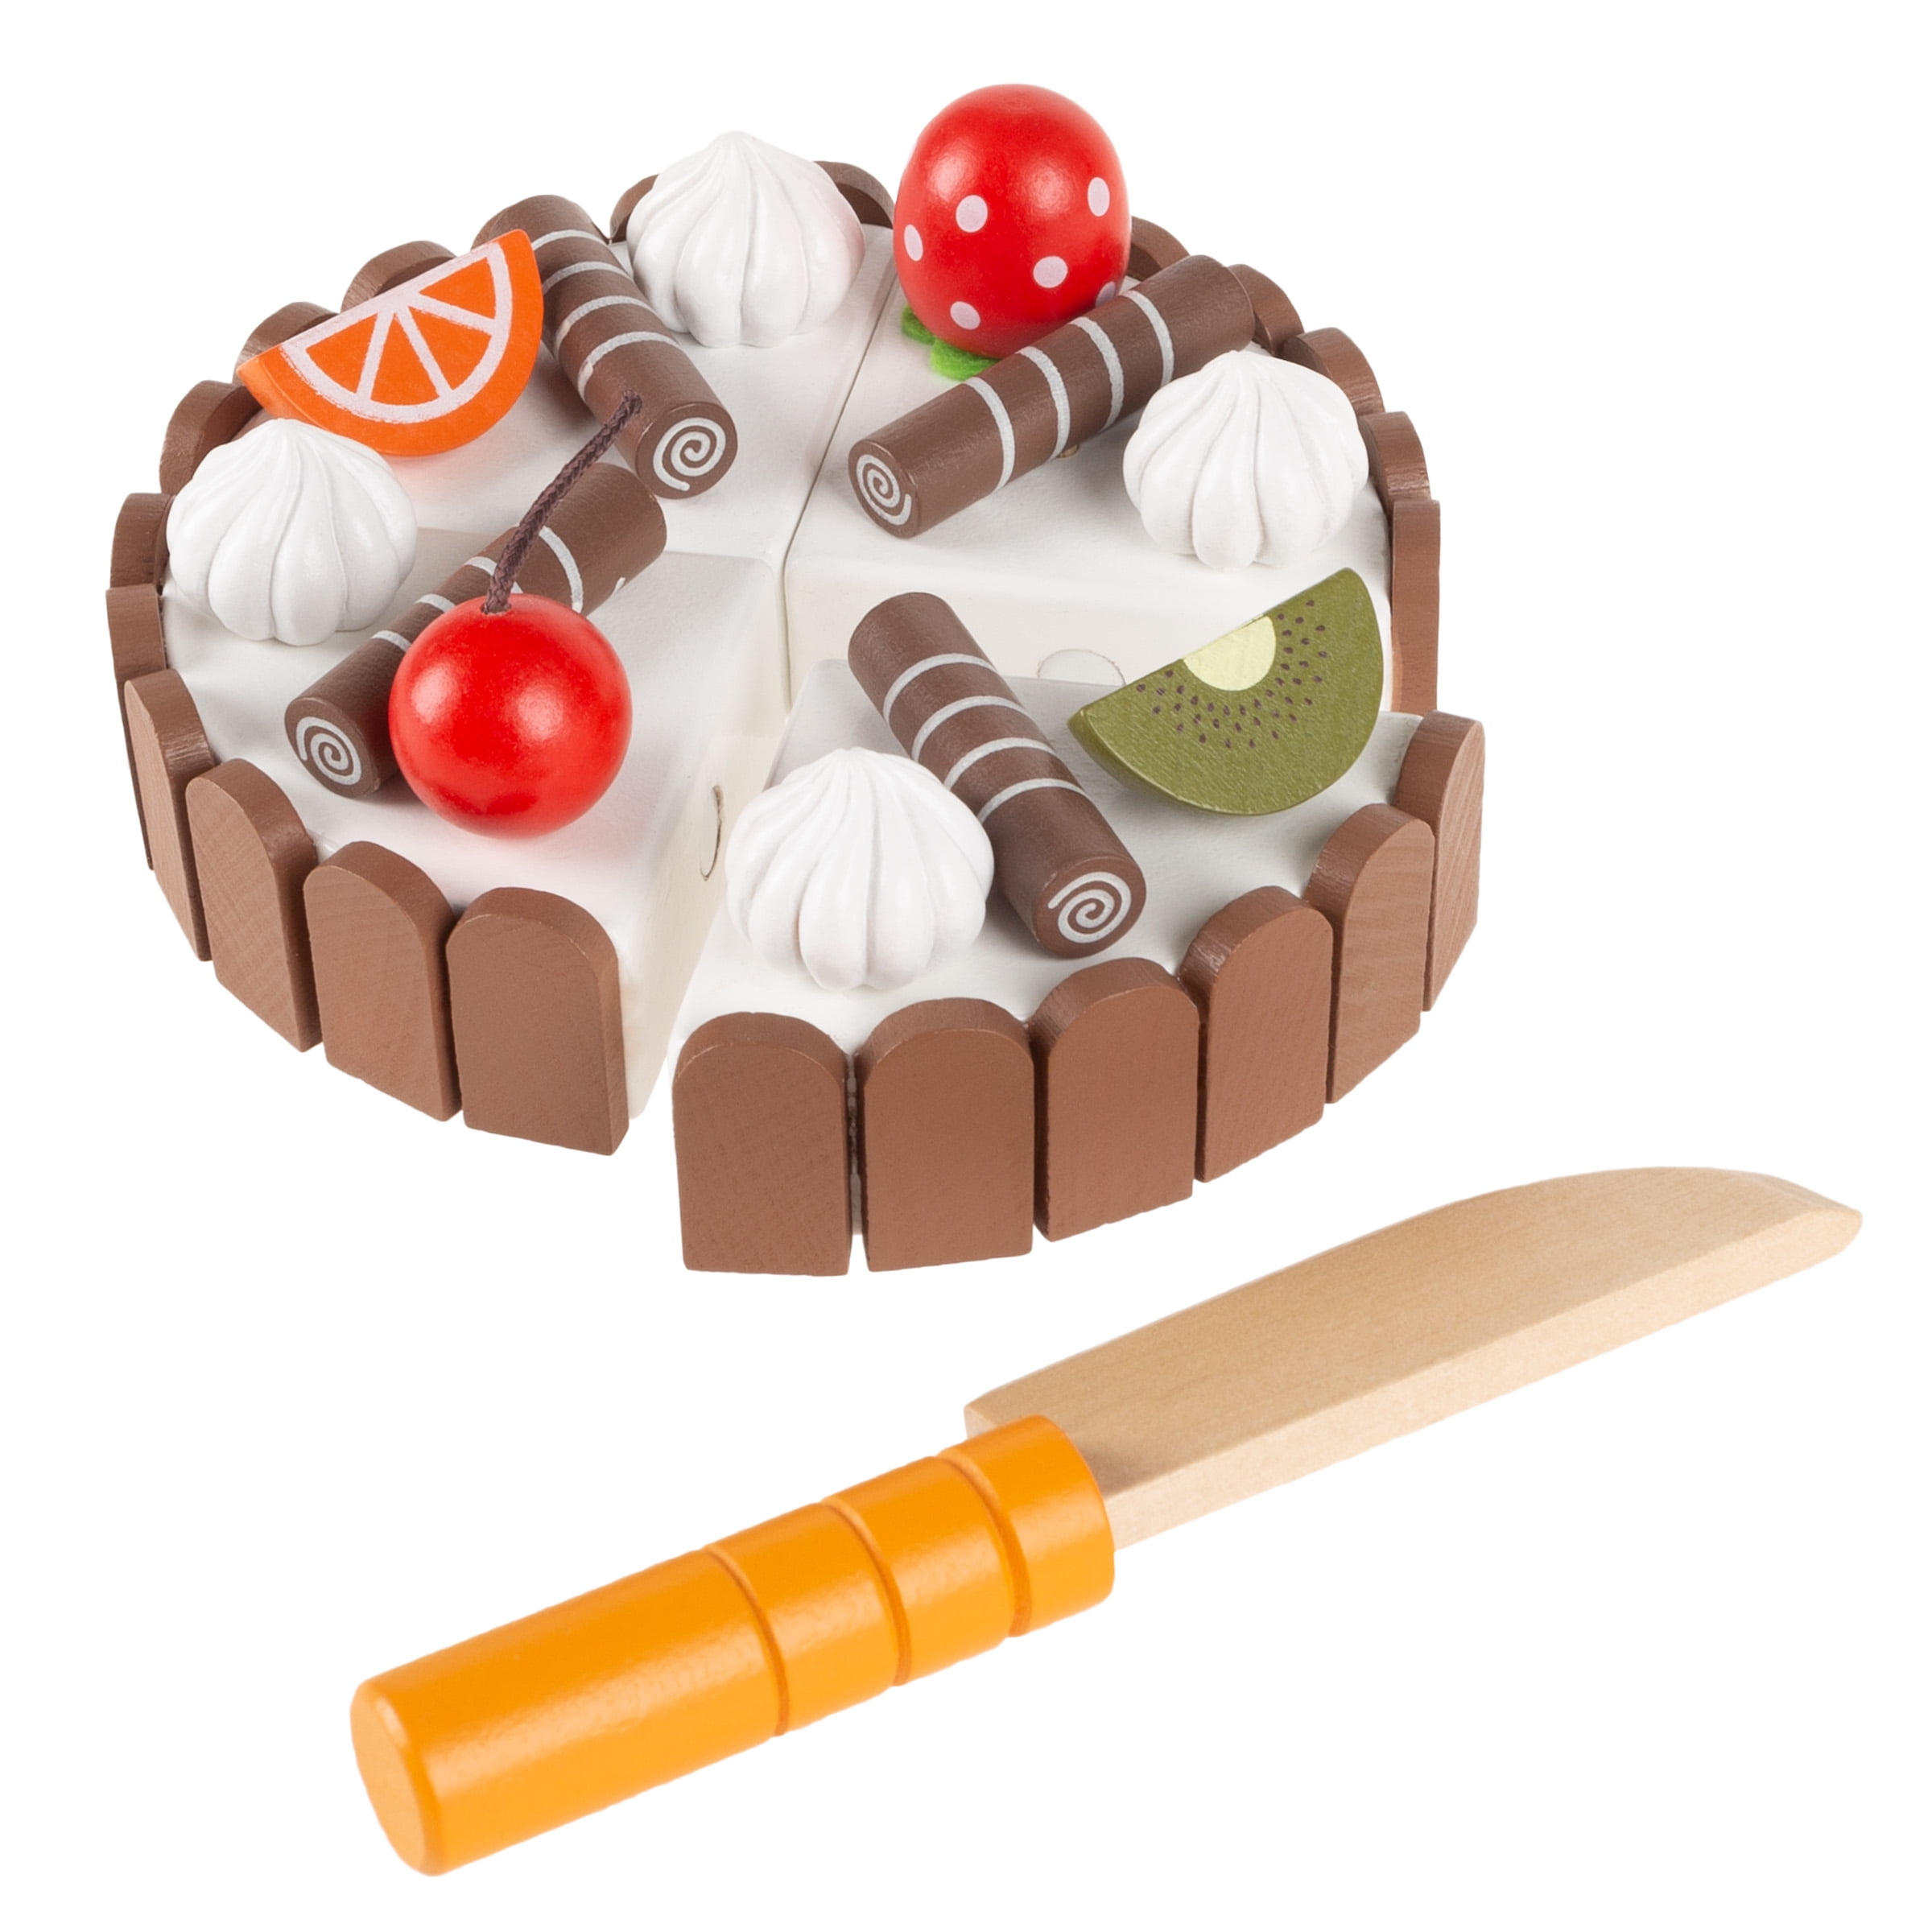 Happy Birthday Party Cake Kids Toy by Imagination Generation Details about   Wood Eats 